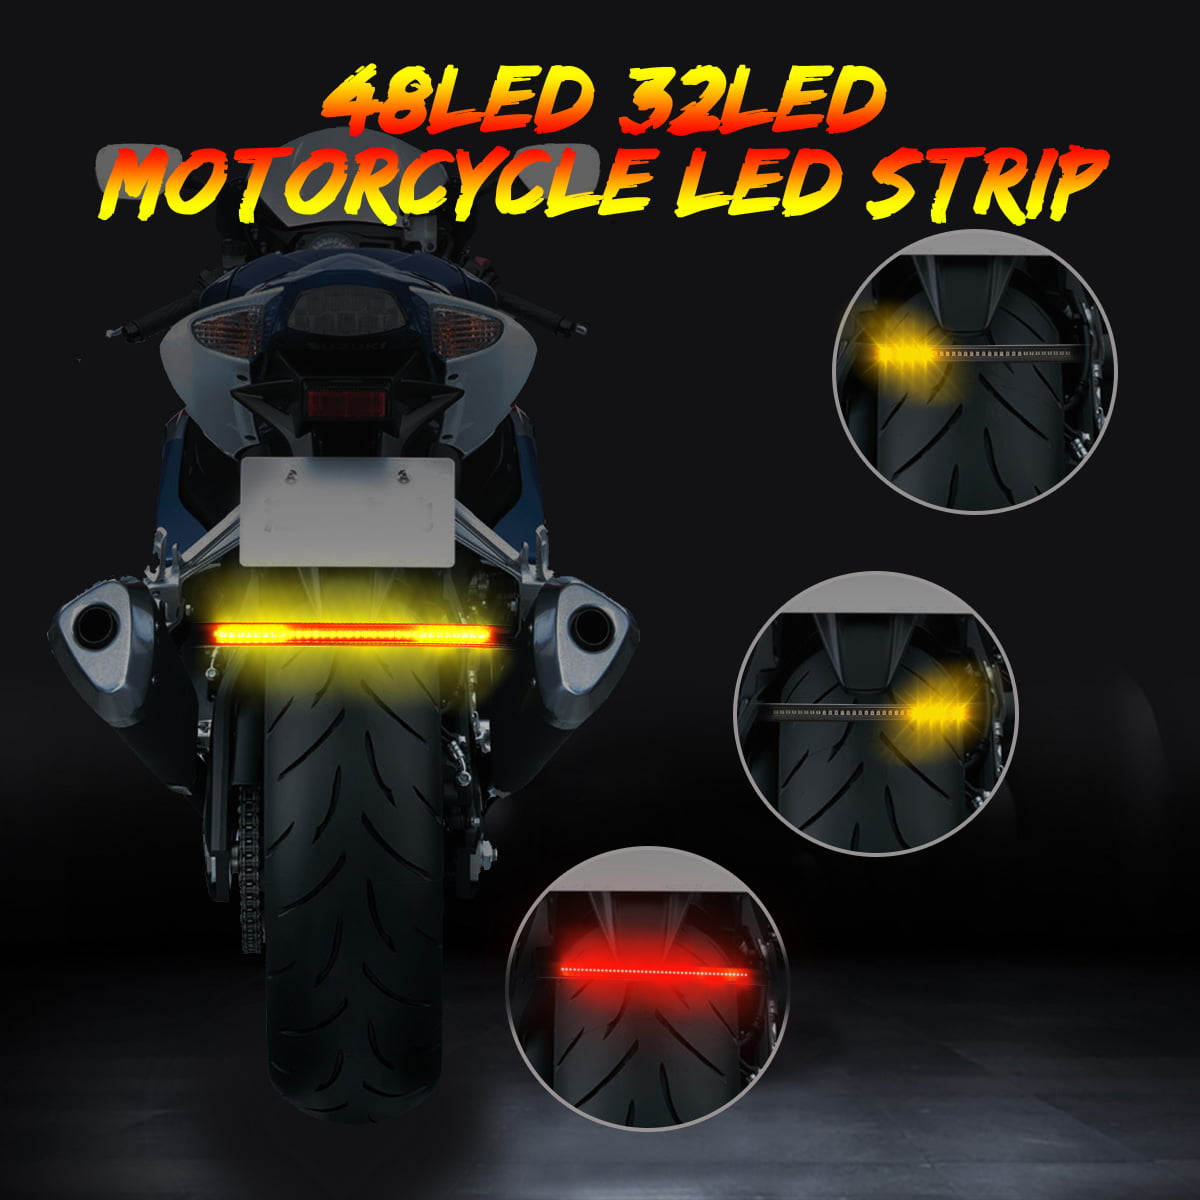 4x Sequential Flowing Motorcycle 12LED Strips Turn Signal Light Tail Blinker 12V